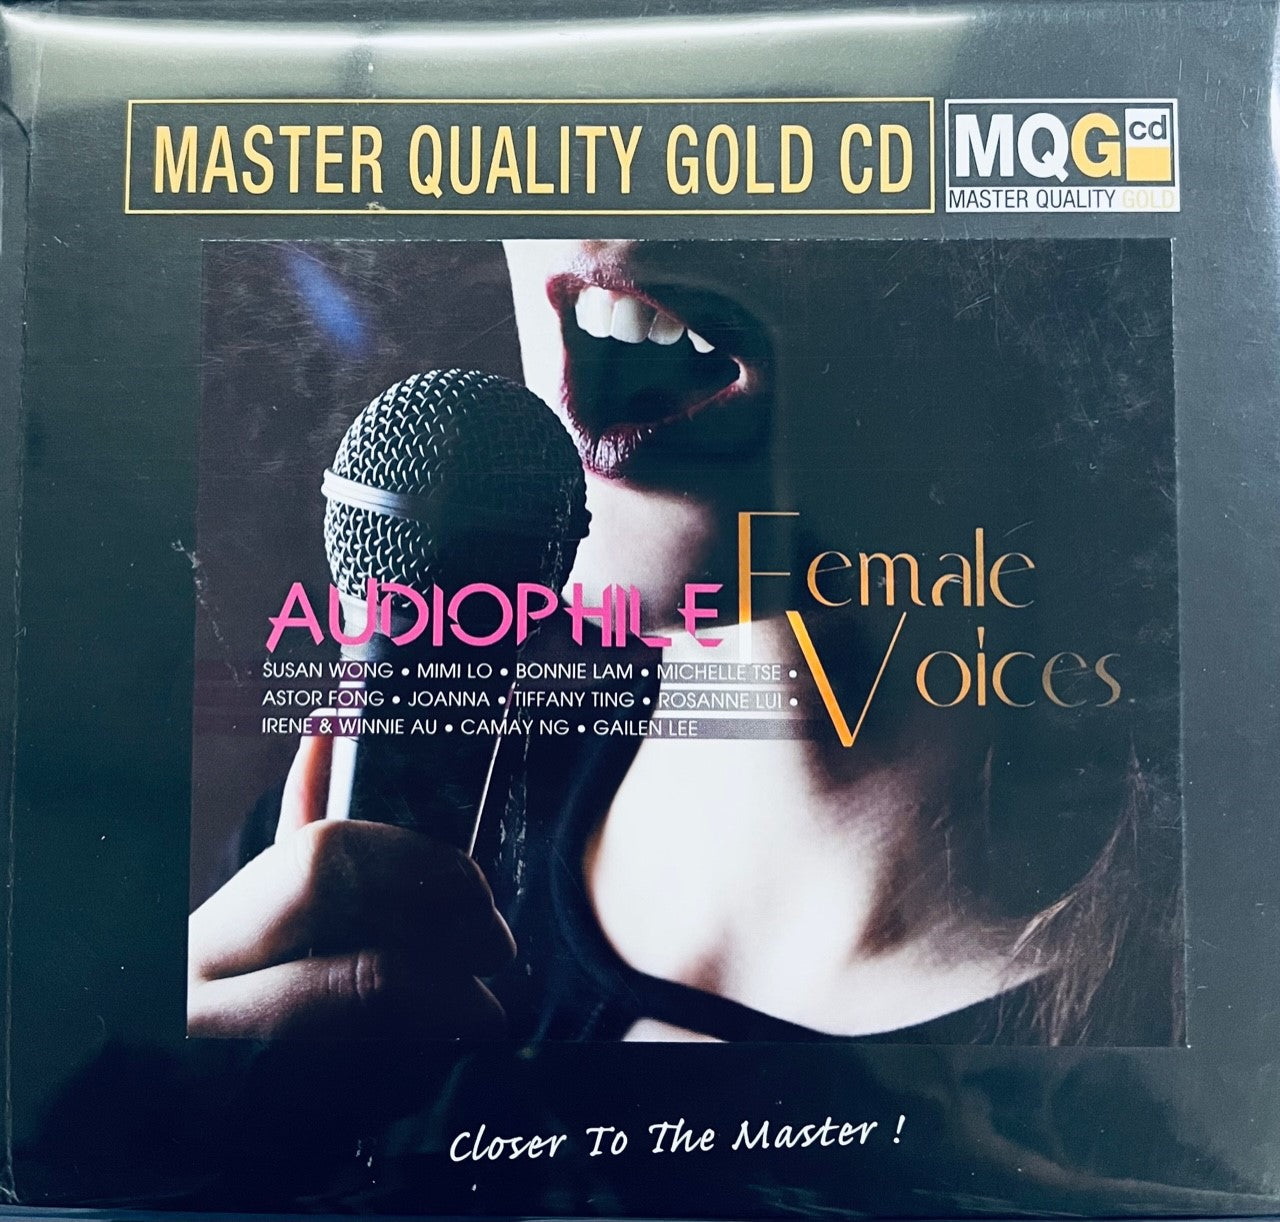 AUDIOPHILE FEMALE VOICES - VARIOUS ARTISTS master quality (MQGCD) CD